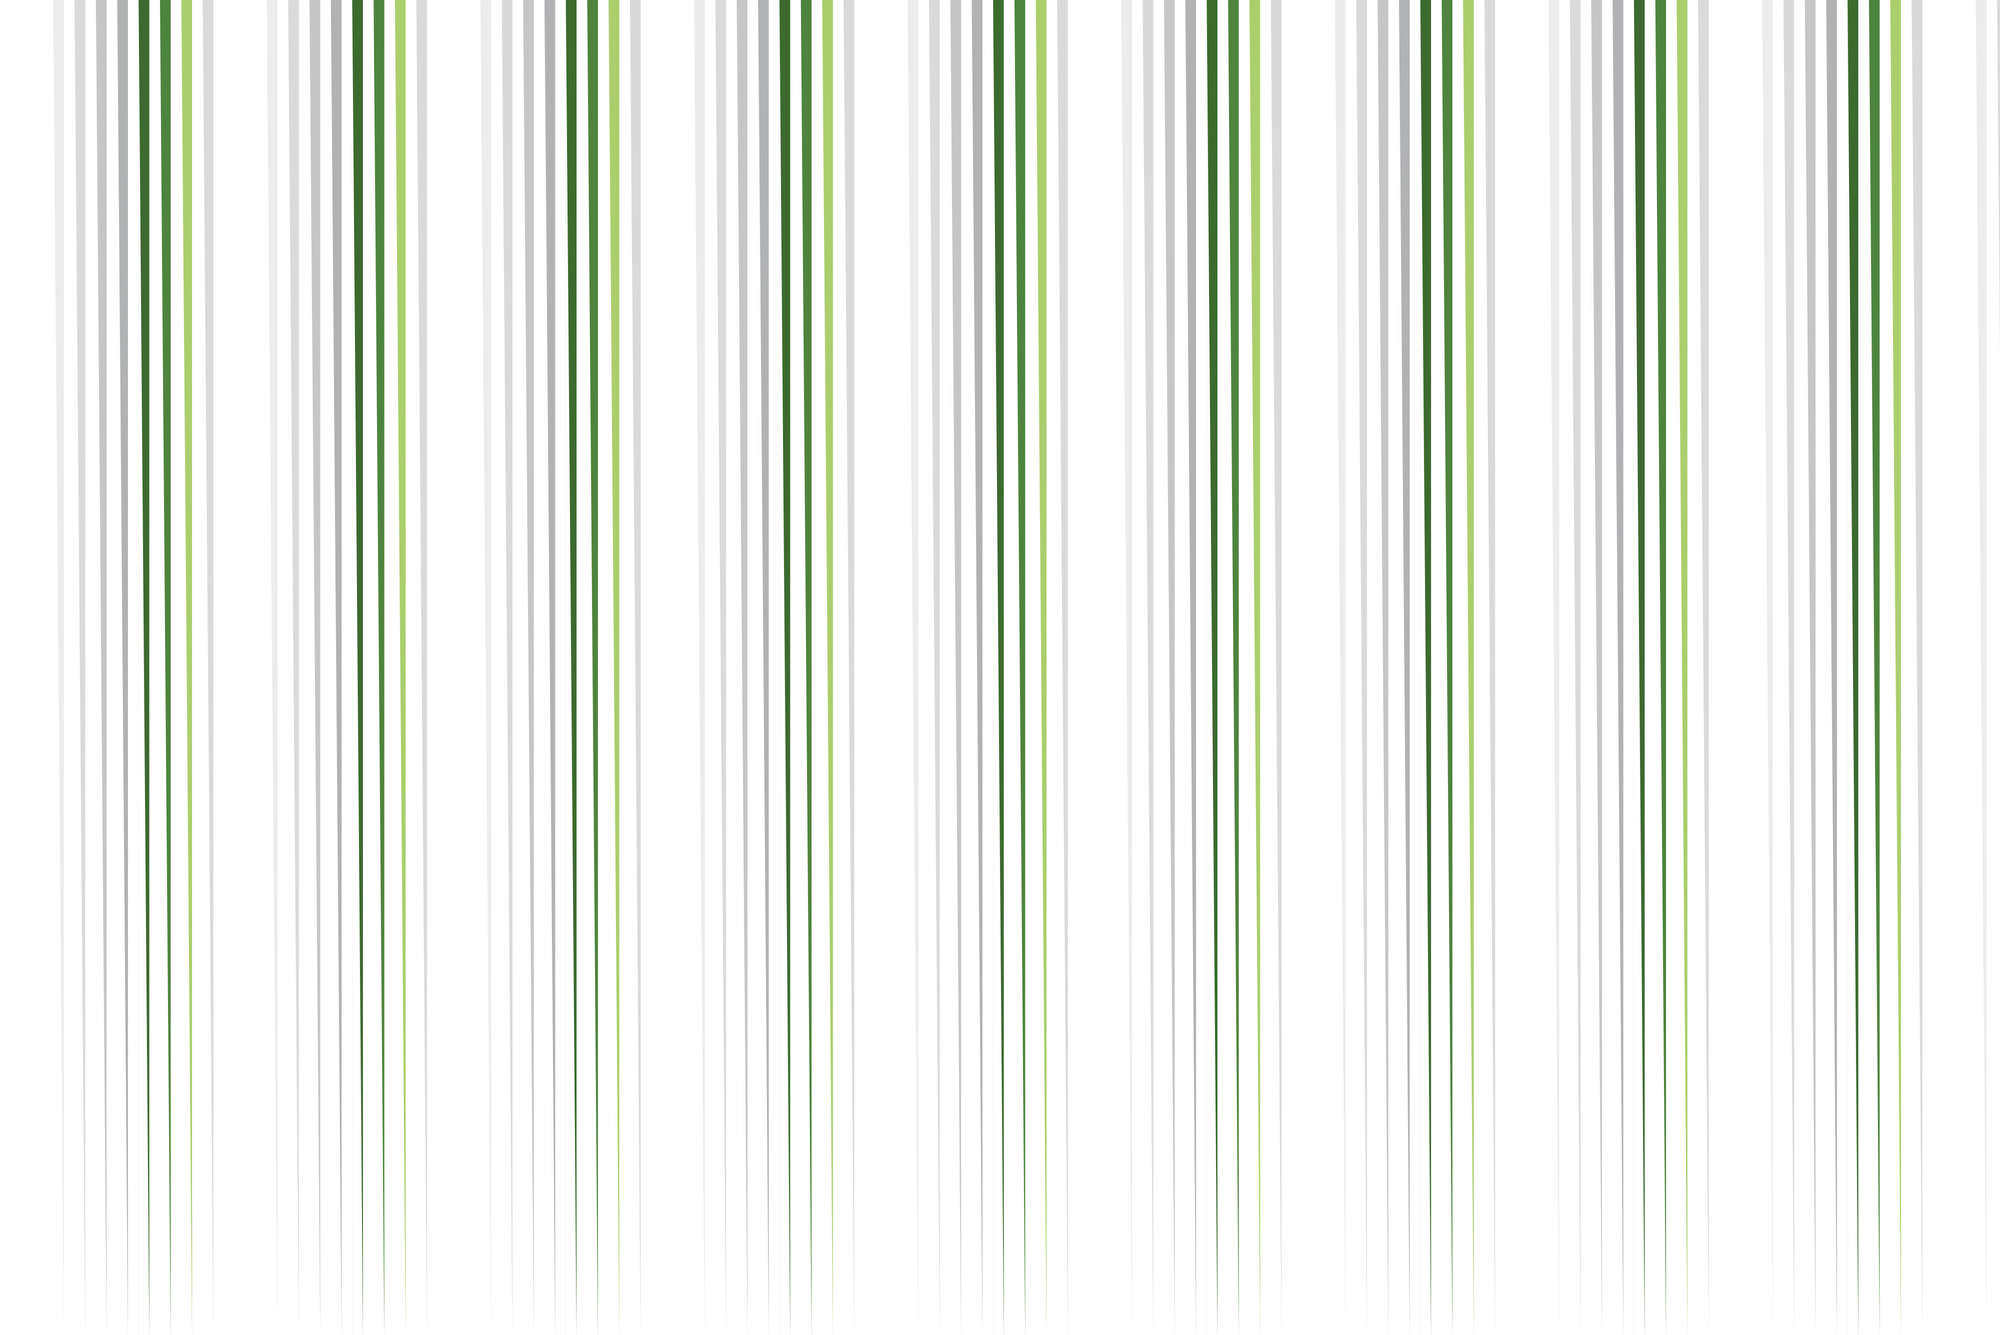             Design wall mural thinning stripes white green on mother of pearl smooth non-woven
        